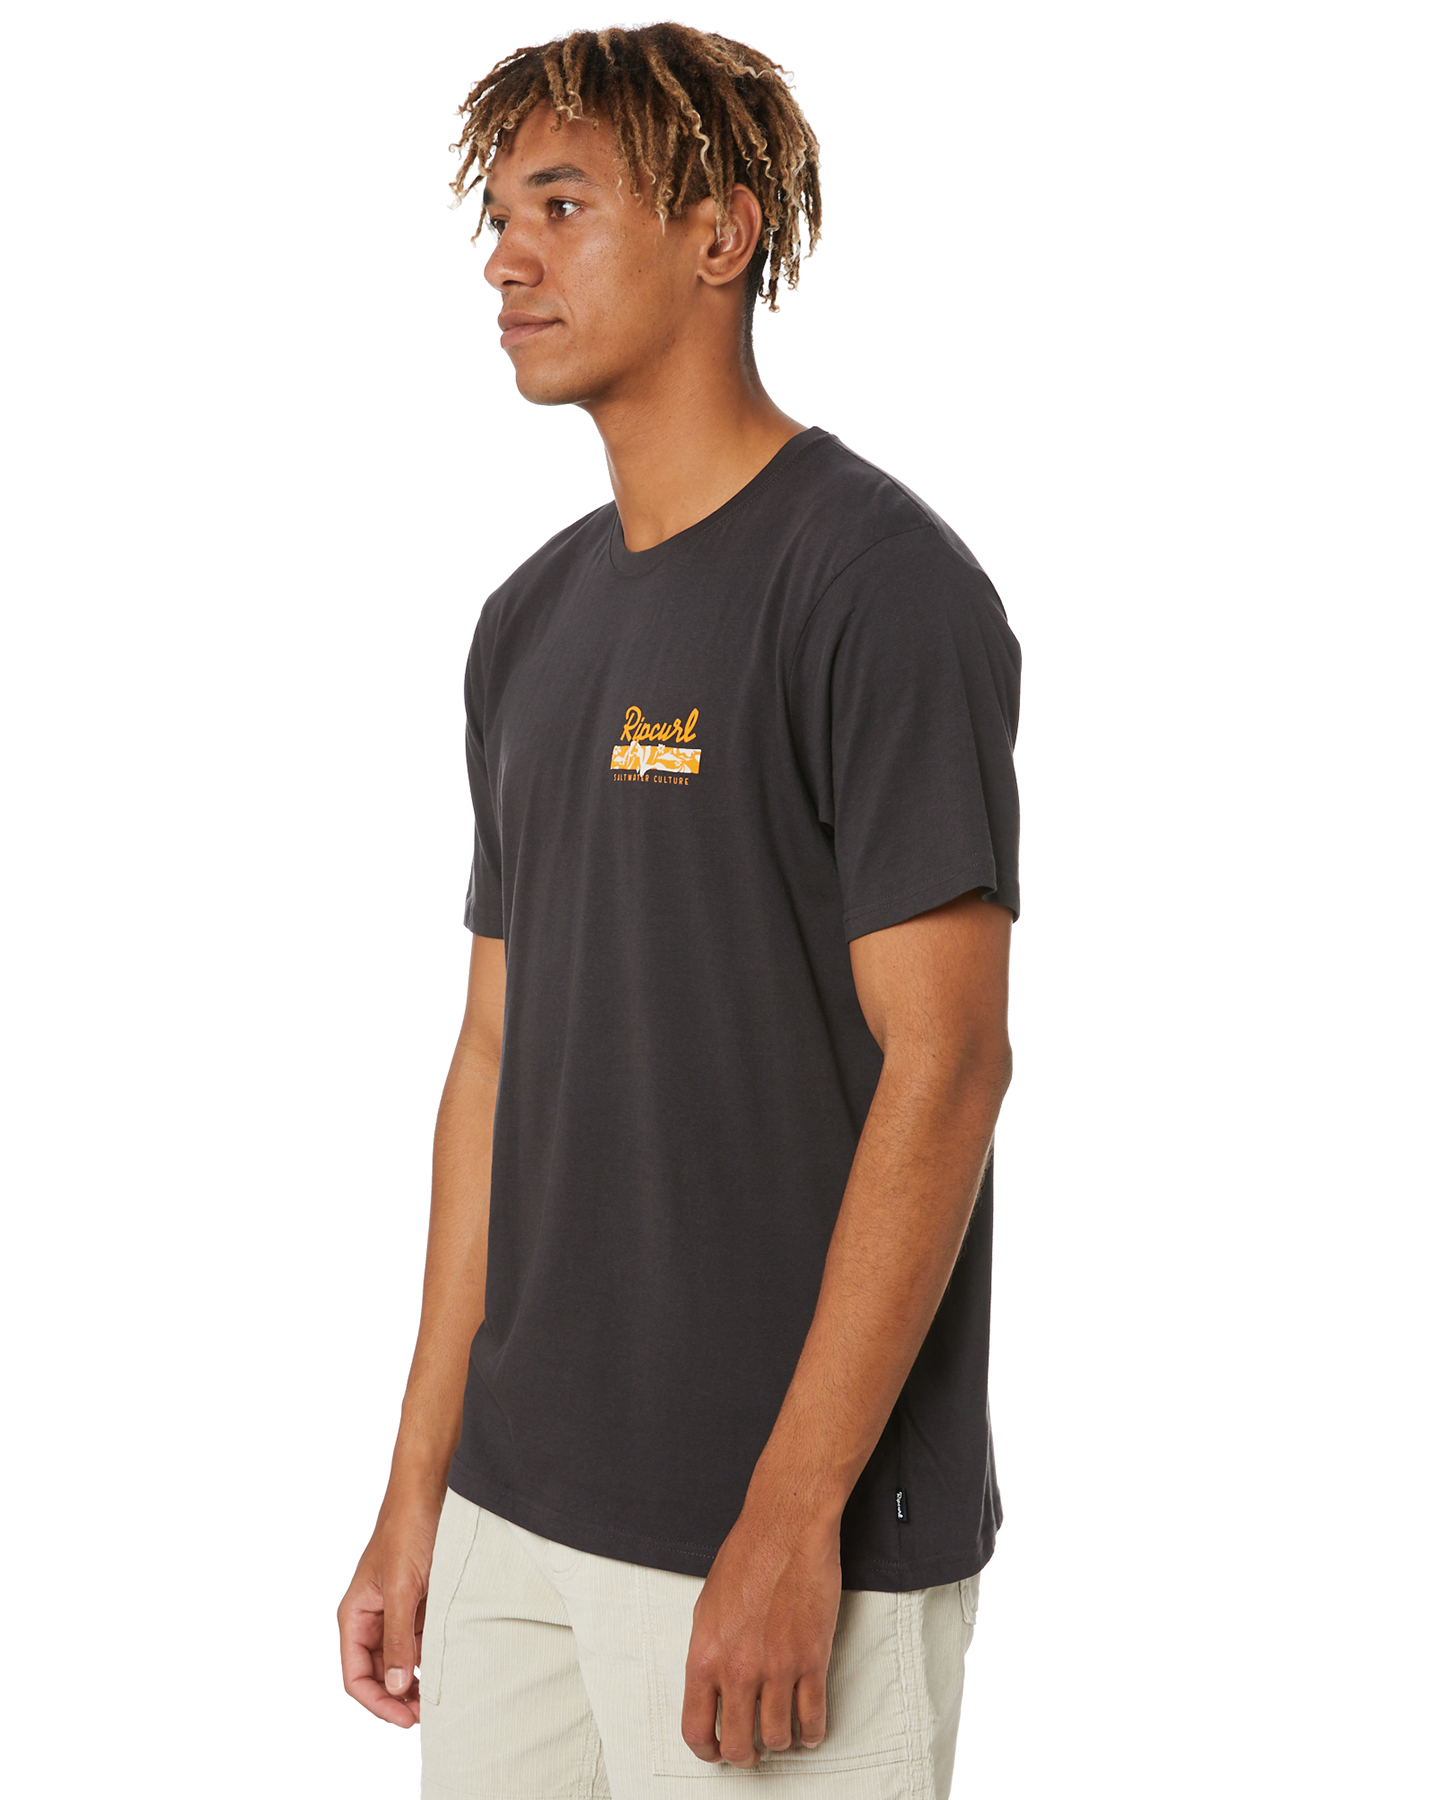 Rip Curl Swc Stripe Mens Tee - Washed Black | SurfStitch